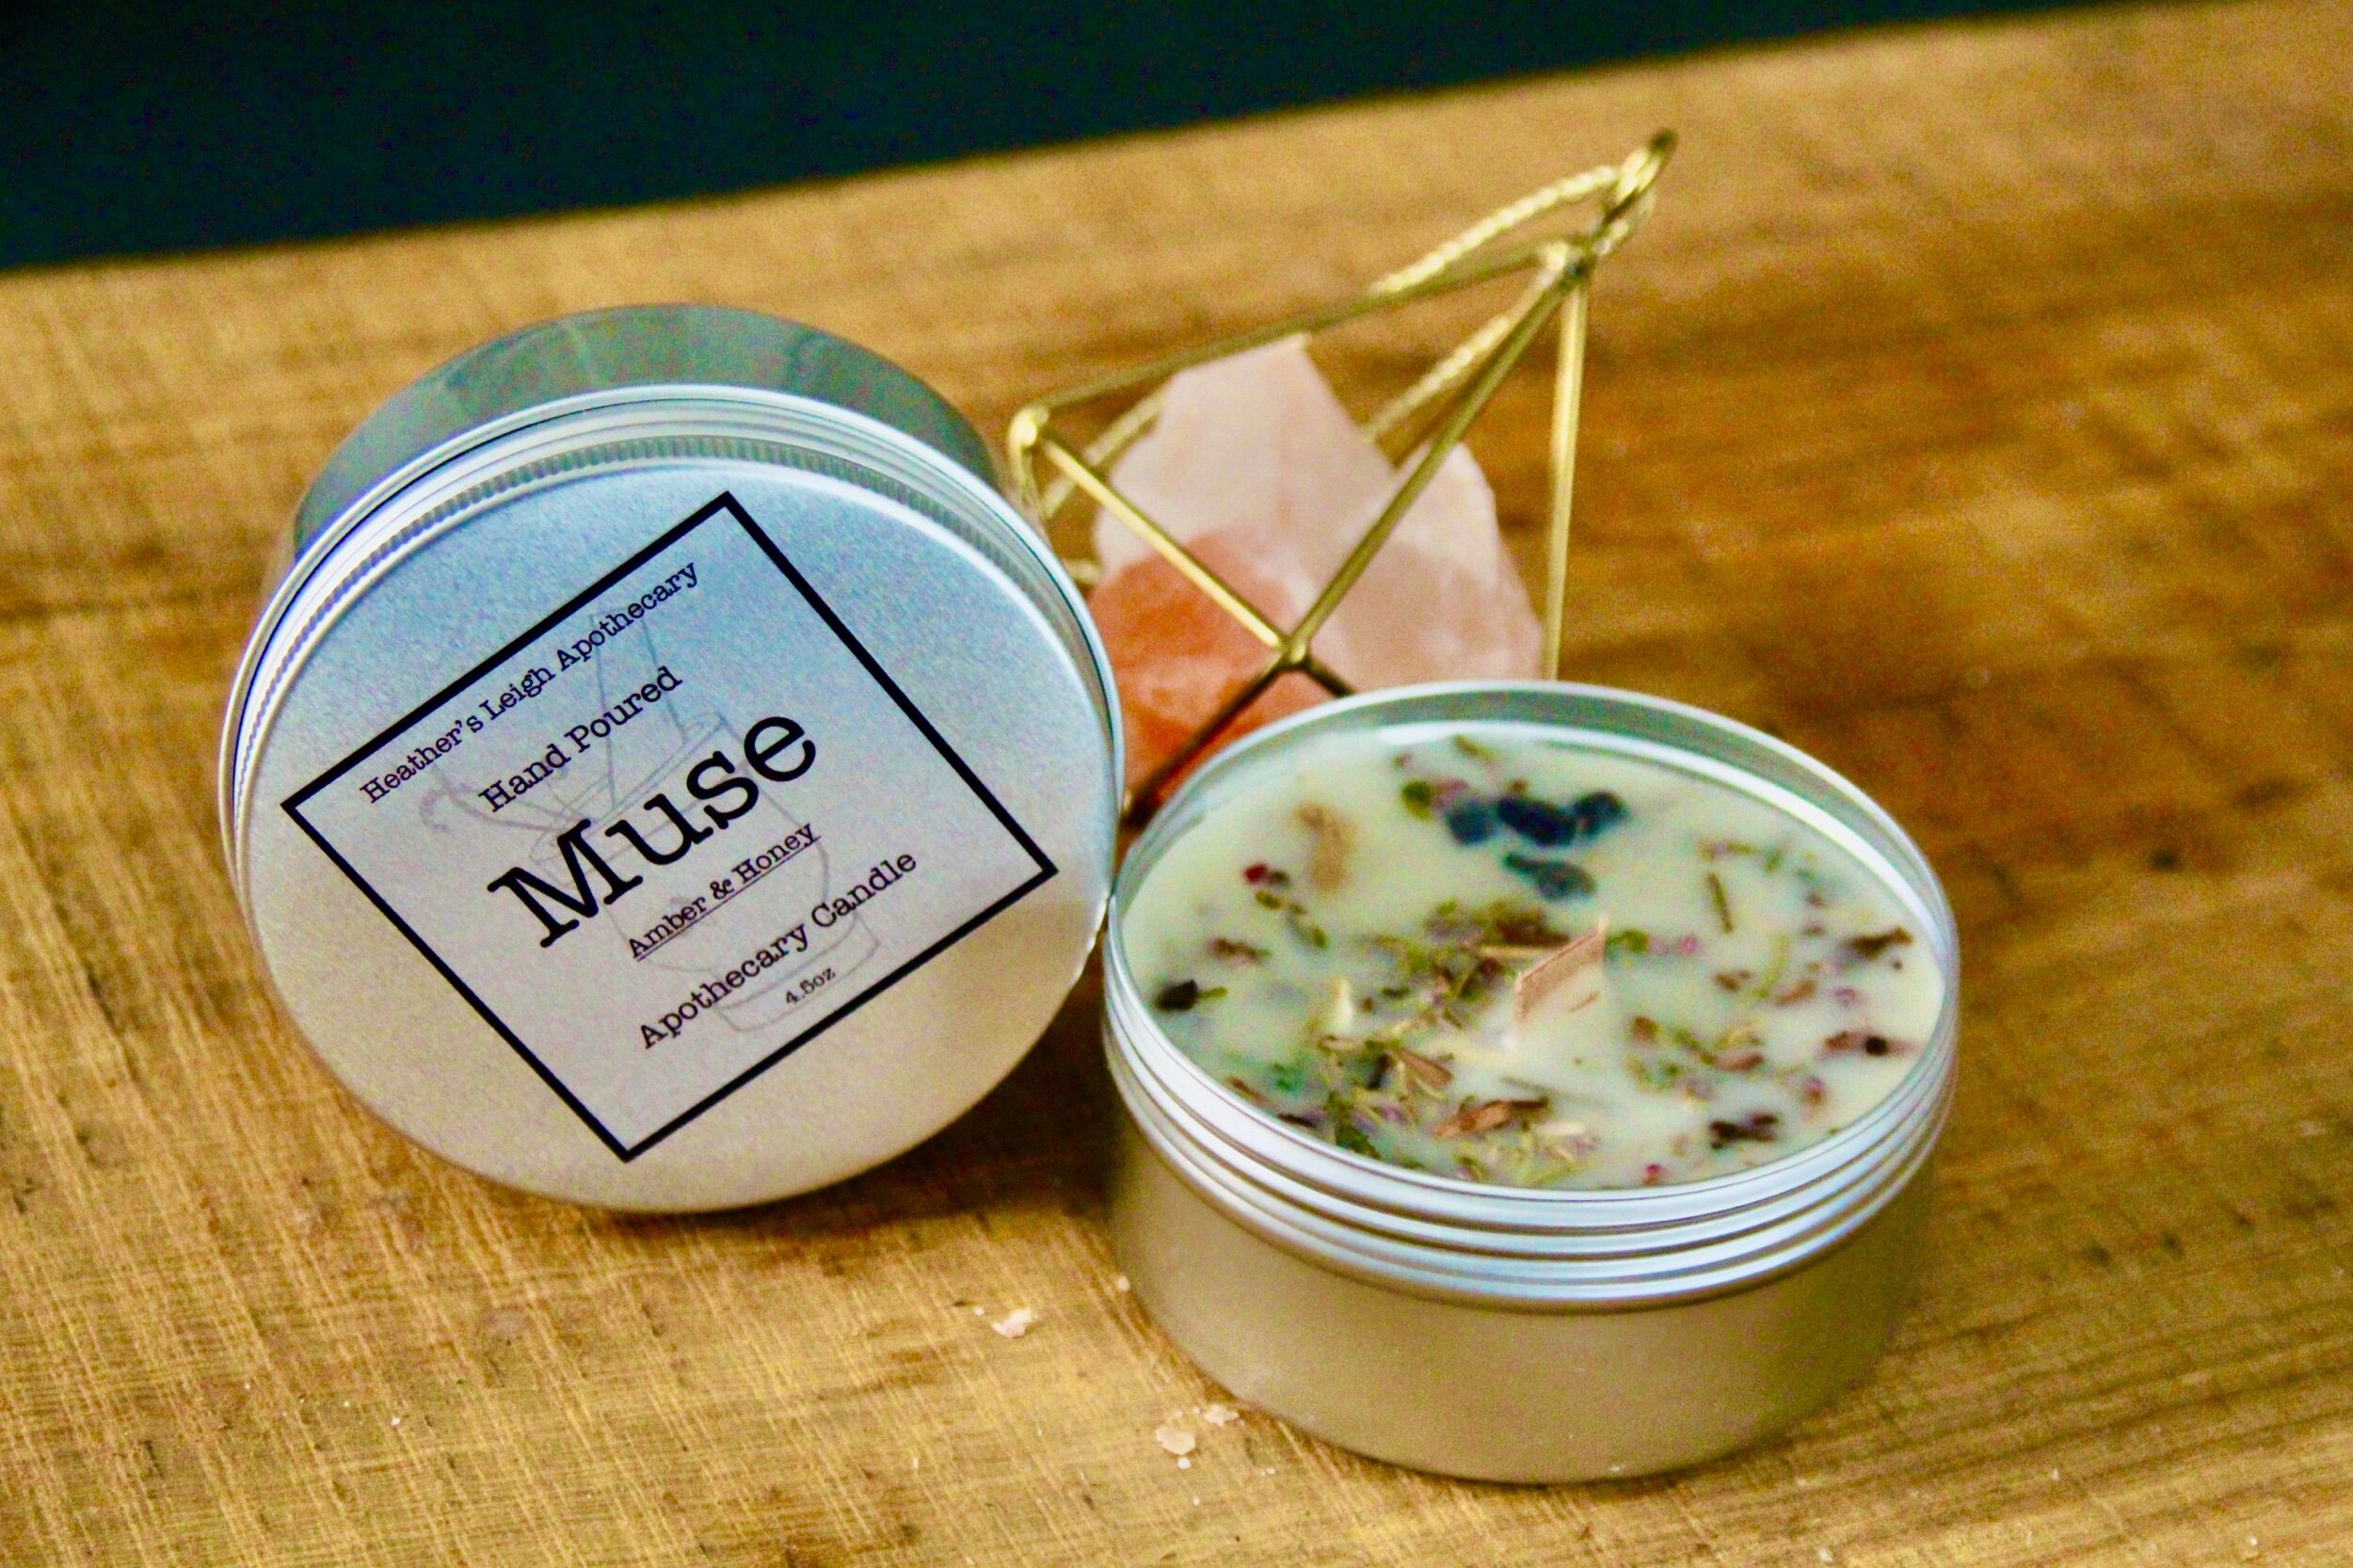 Muse <br/>Apothecary Candle — Heather's Leigh Apothecary